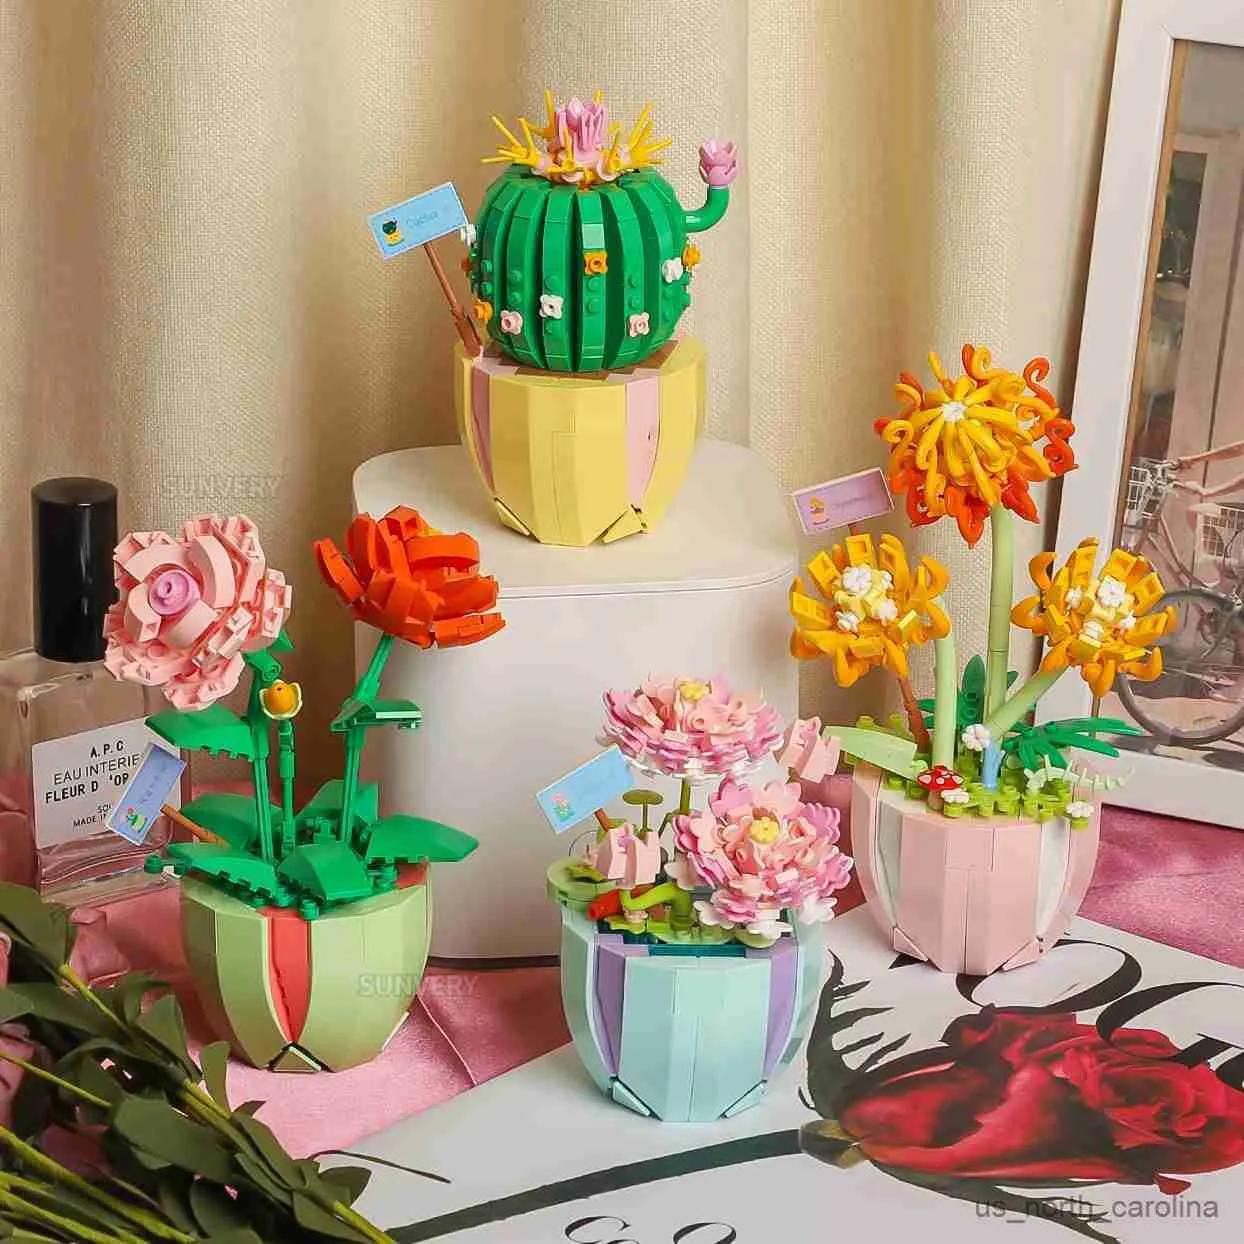 BLOCKS Creative Floral Potted Plant Potted Flower Cactus Lotus Building Block Bouquets Desk Decoration Toys for Girls Gift R230913